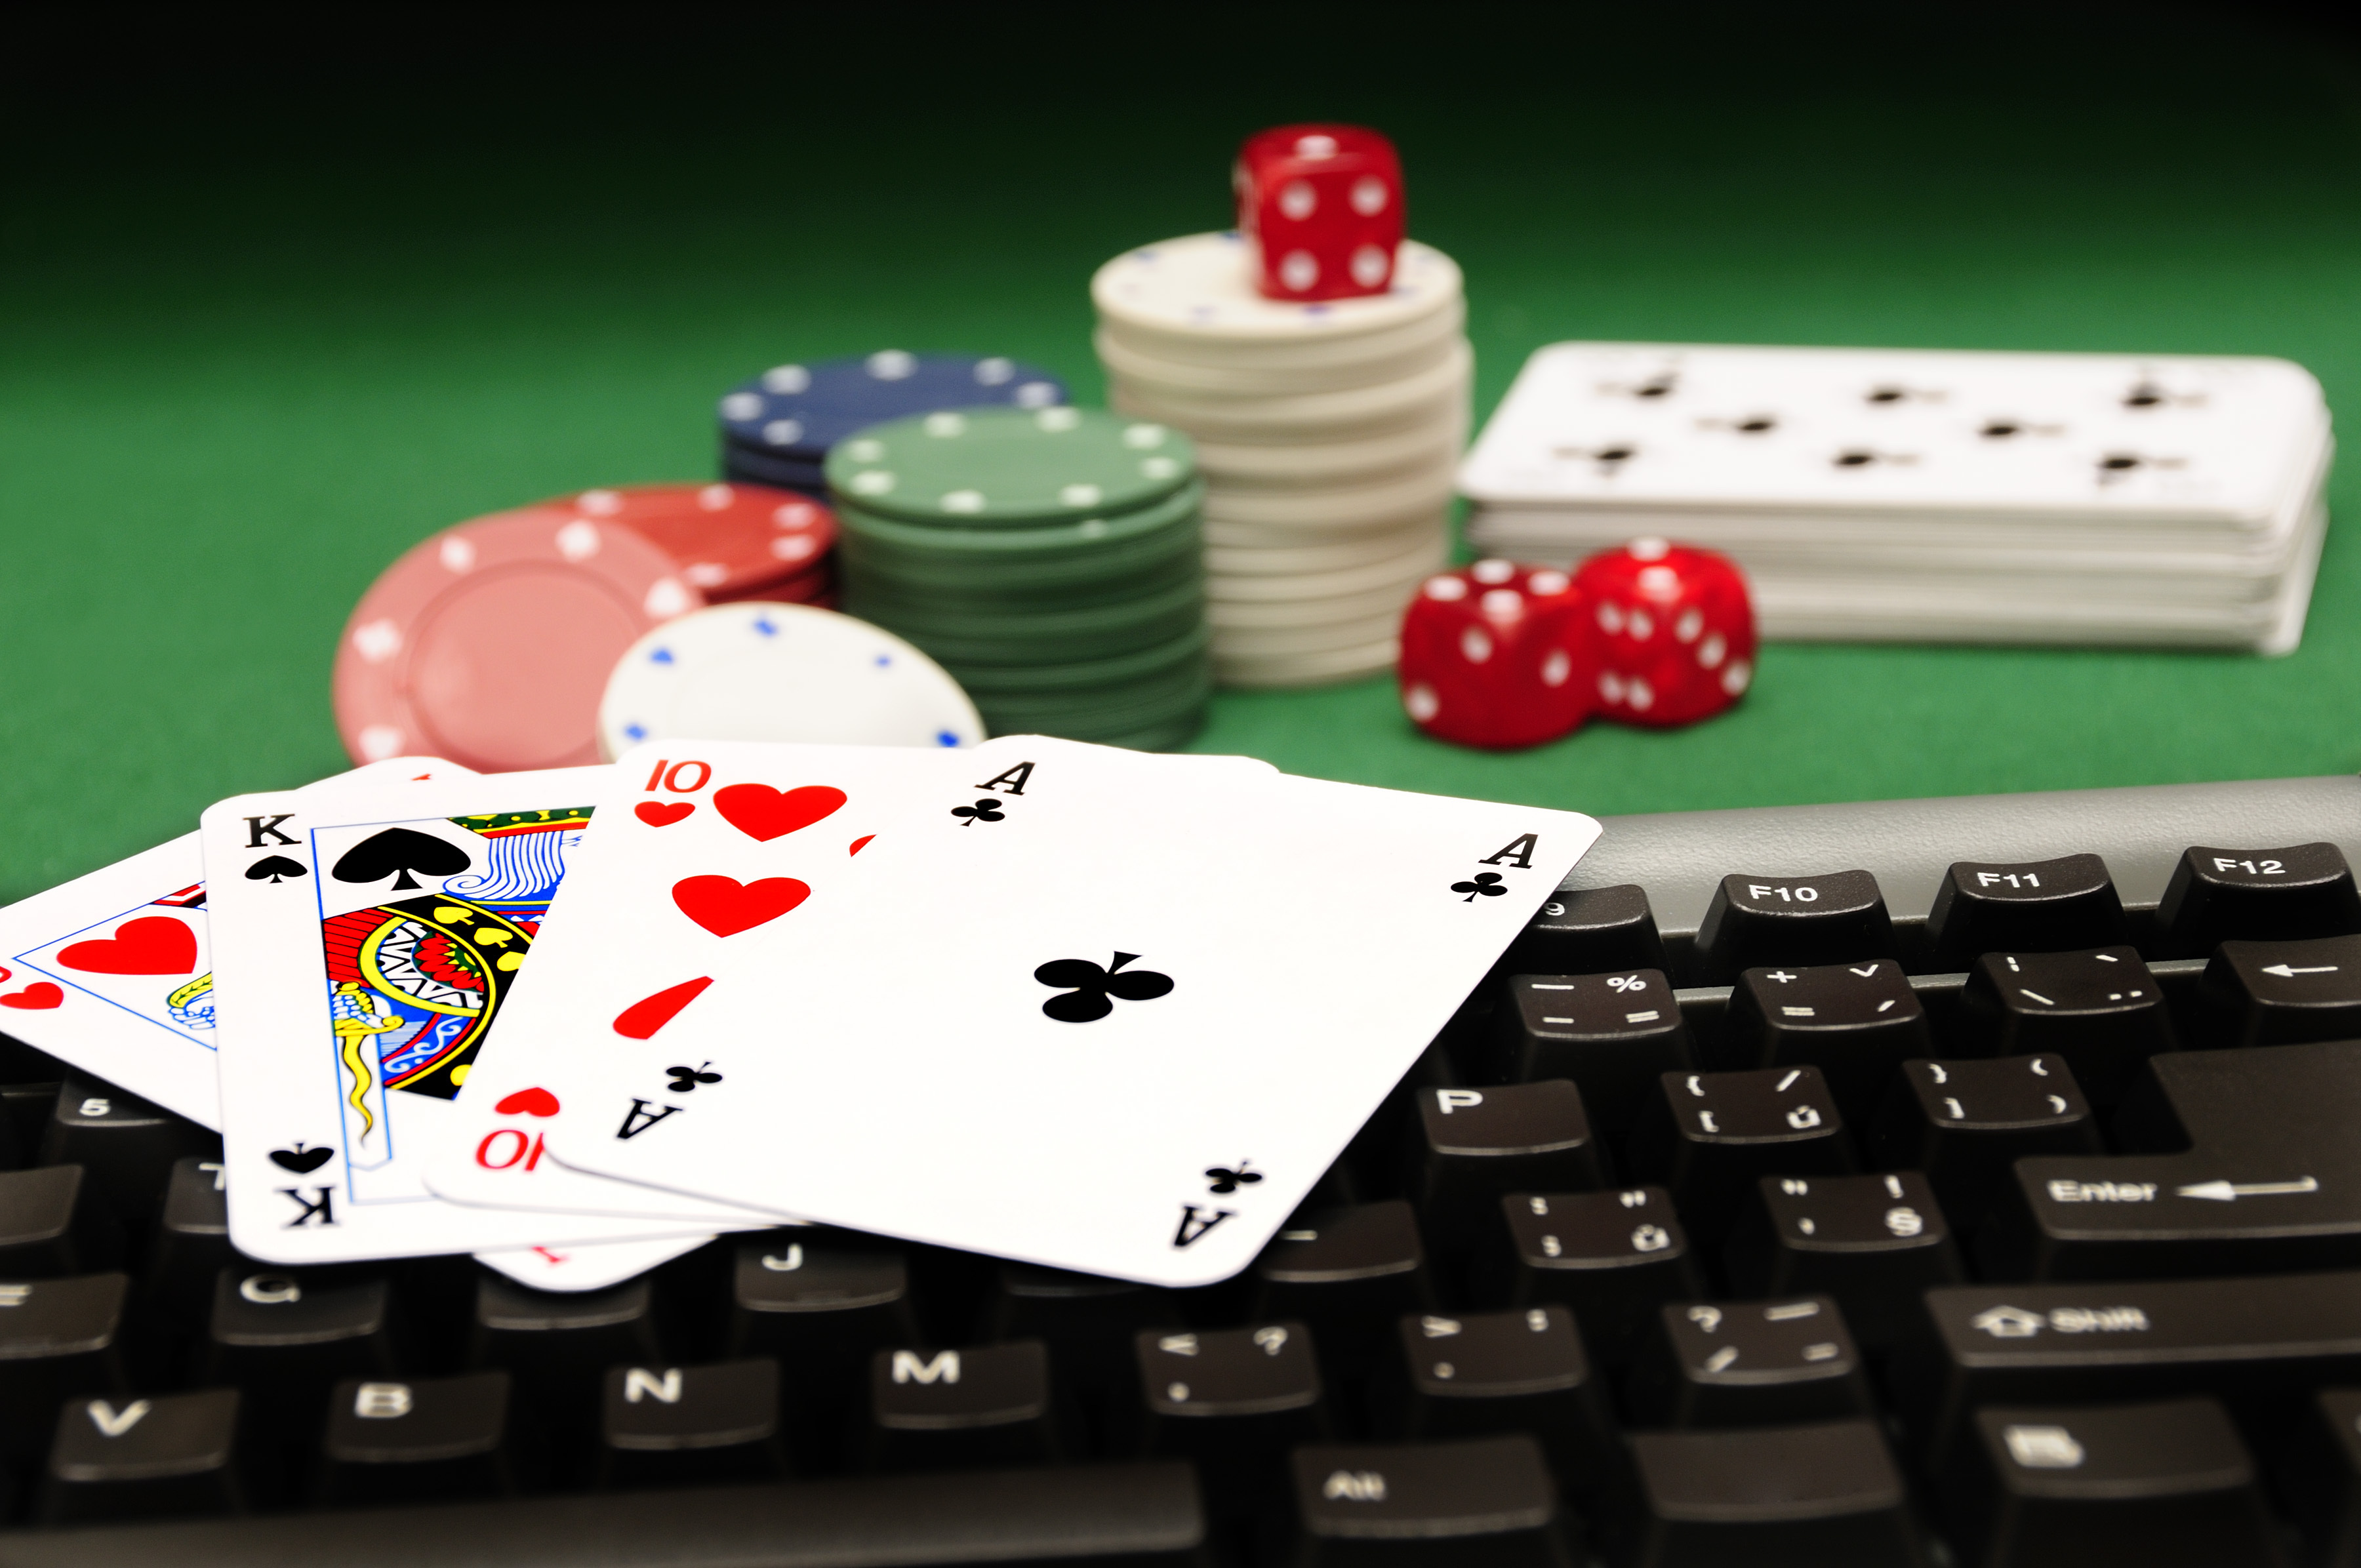 Legal Gambling Could Be Introduced in Ukraine via New Bill